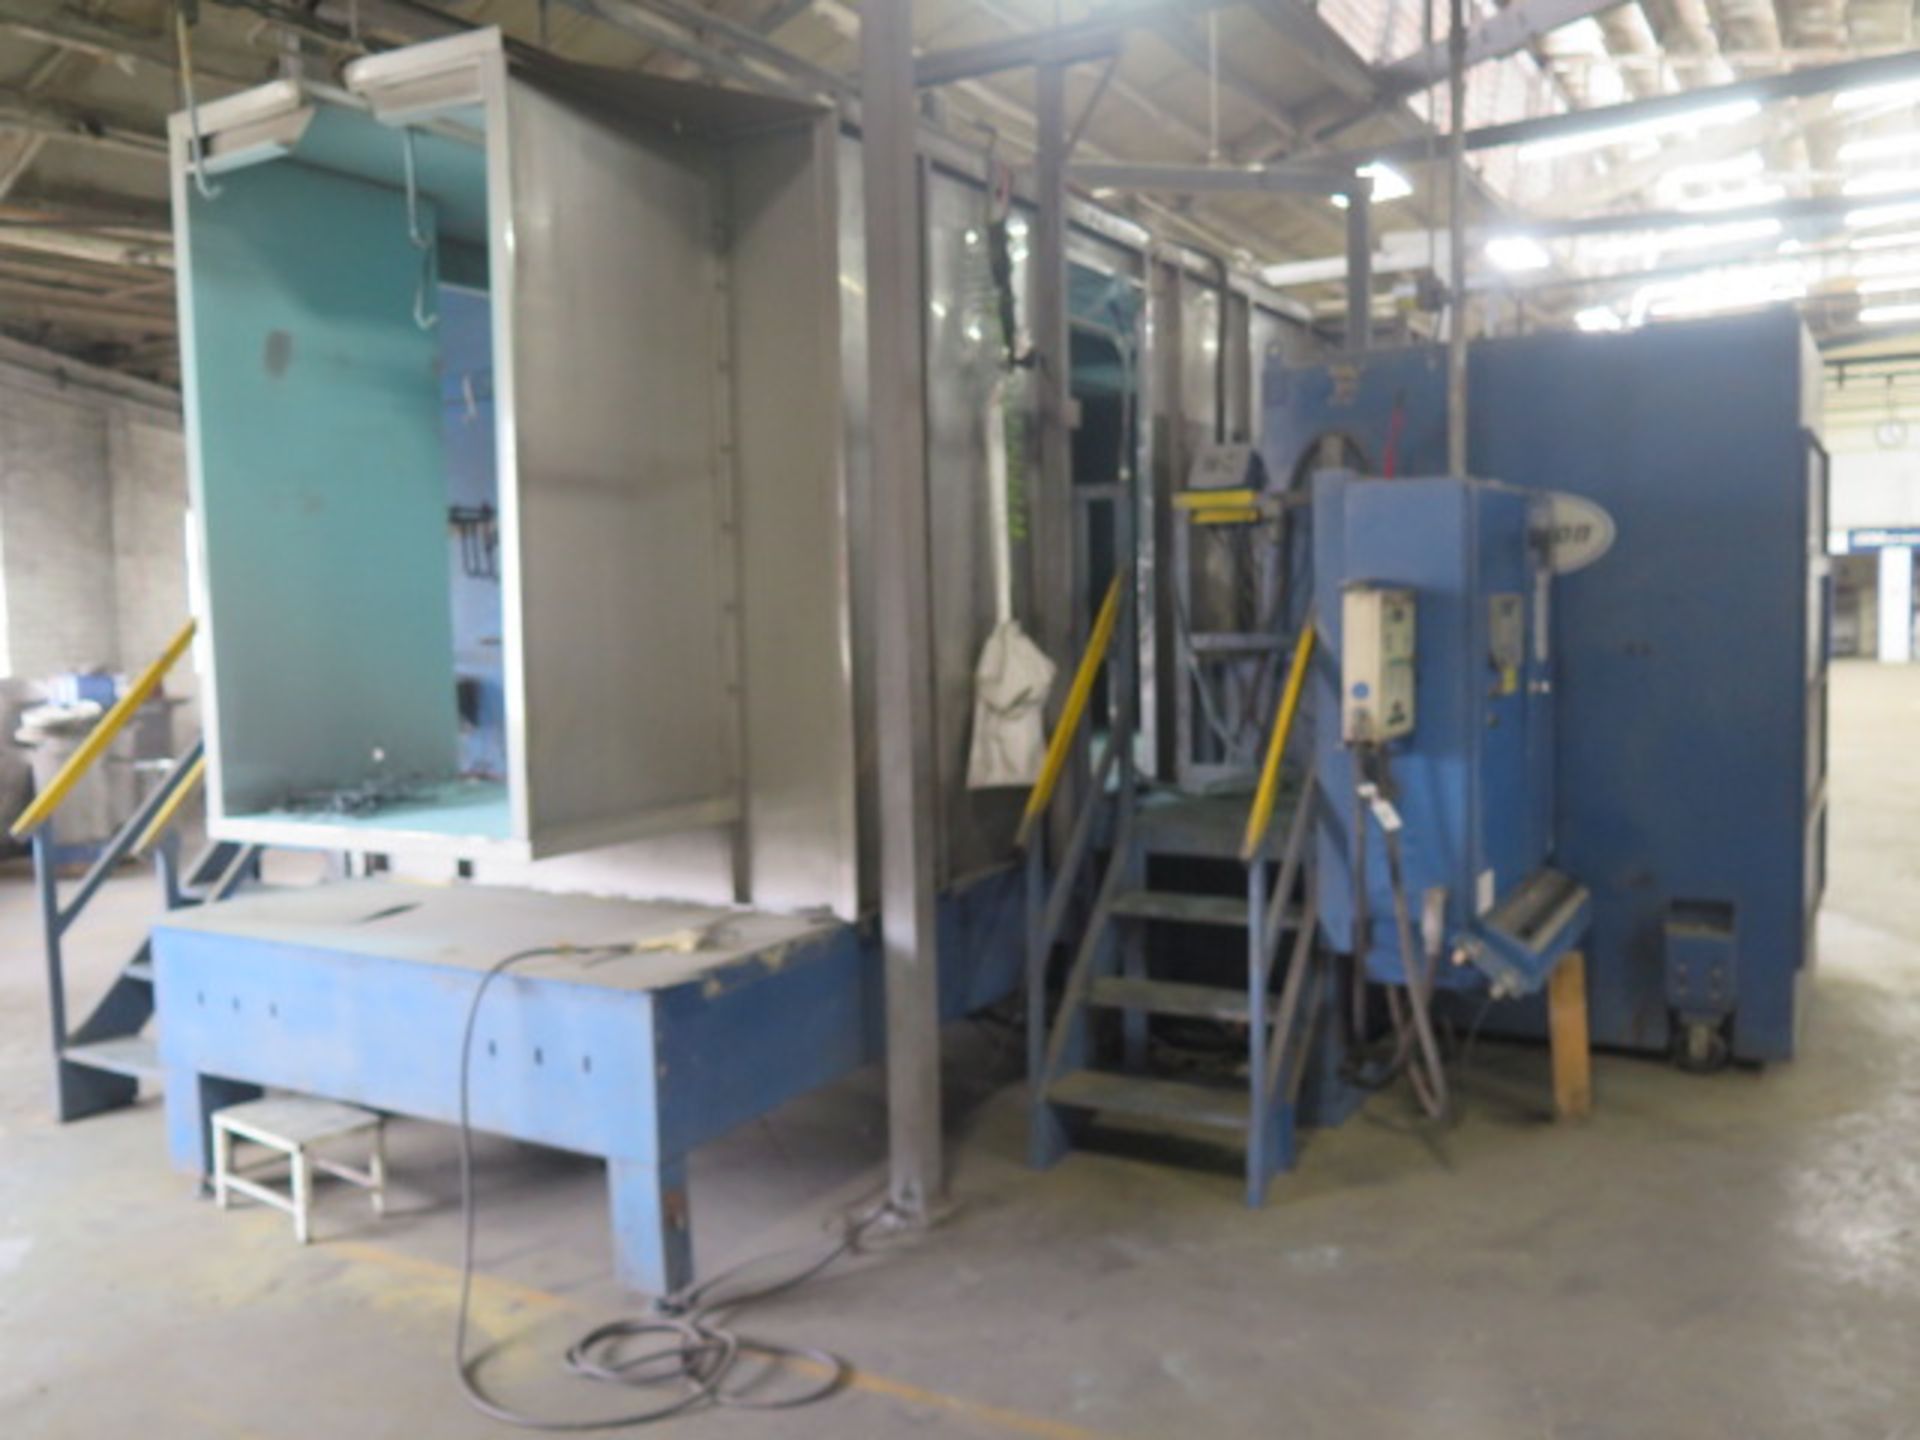 Nordson CK-05 Powder Coating System w/ 20’W x 25’L x 9’6”H Booth, (14) 13” Dia x 36”L Primary